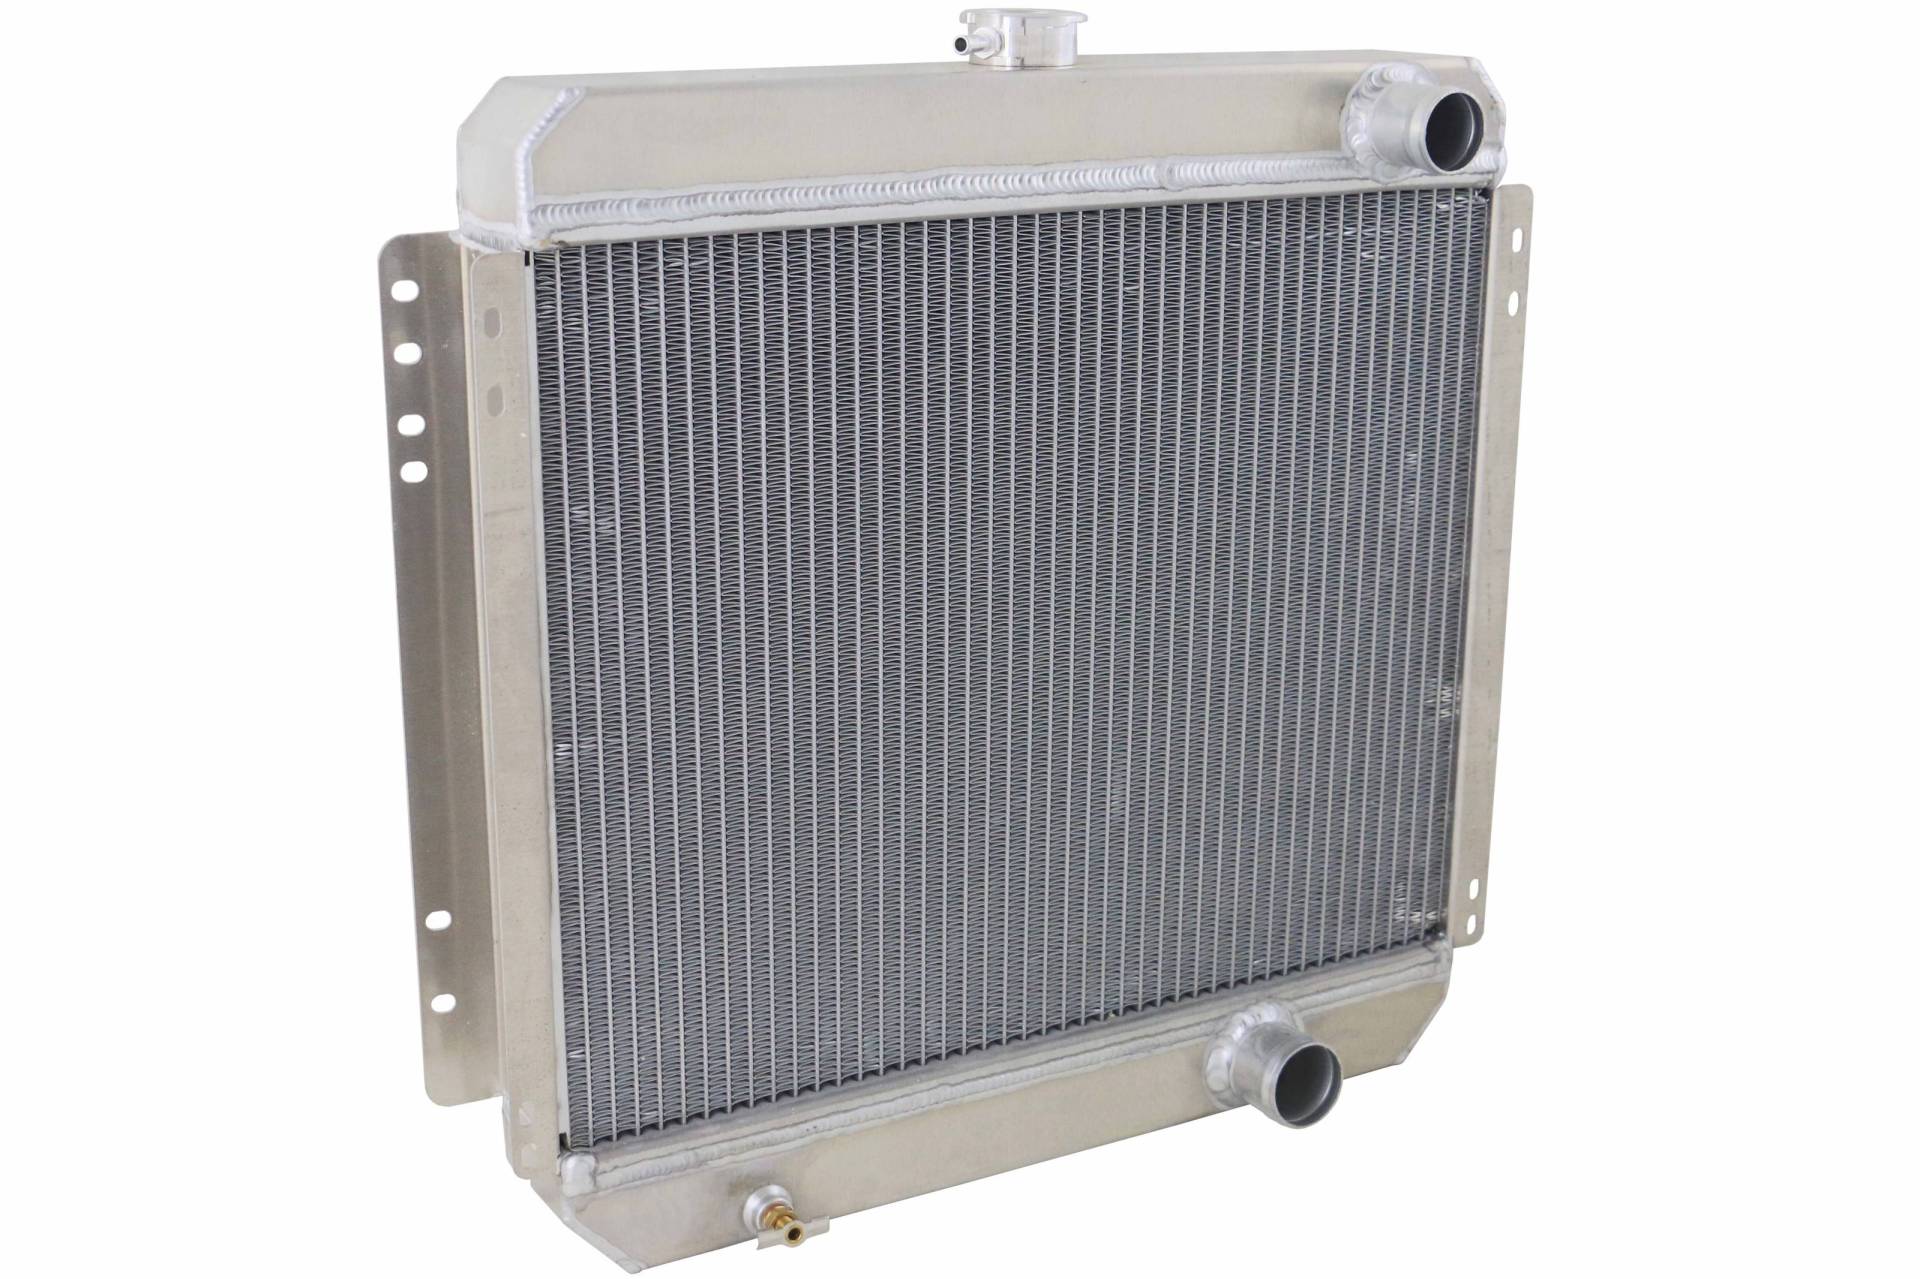 Wizard Cooling Inc - Wizard Cooling - 1967-1969 Ford Mustang & 67-'68 MERCURY Cougar/XR7 (SB V8) Aluminum Radiator - 340-100